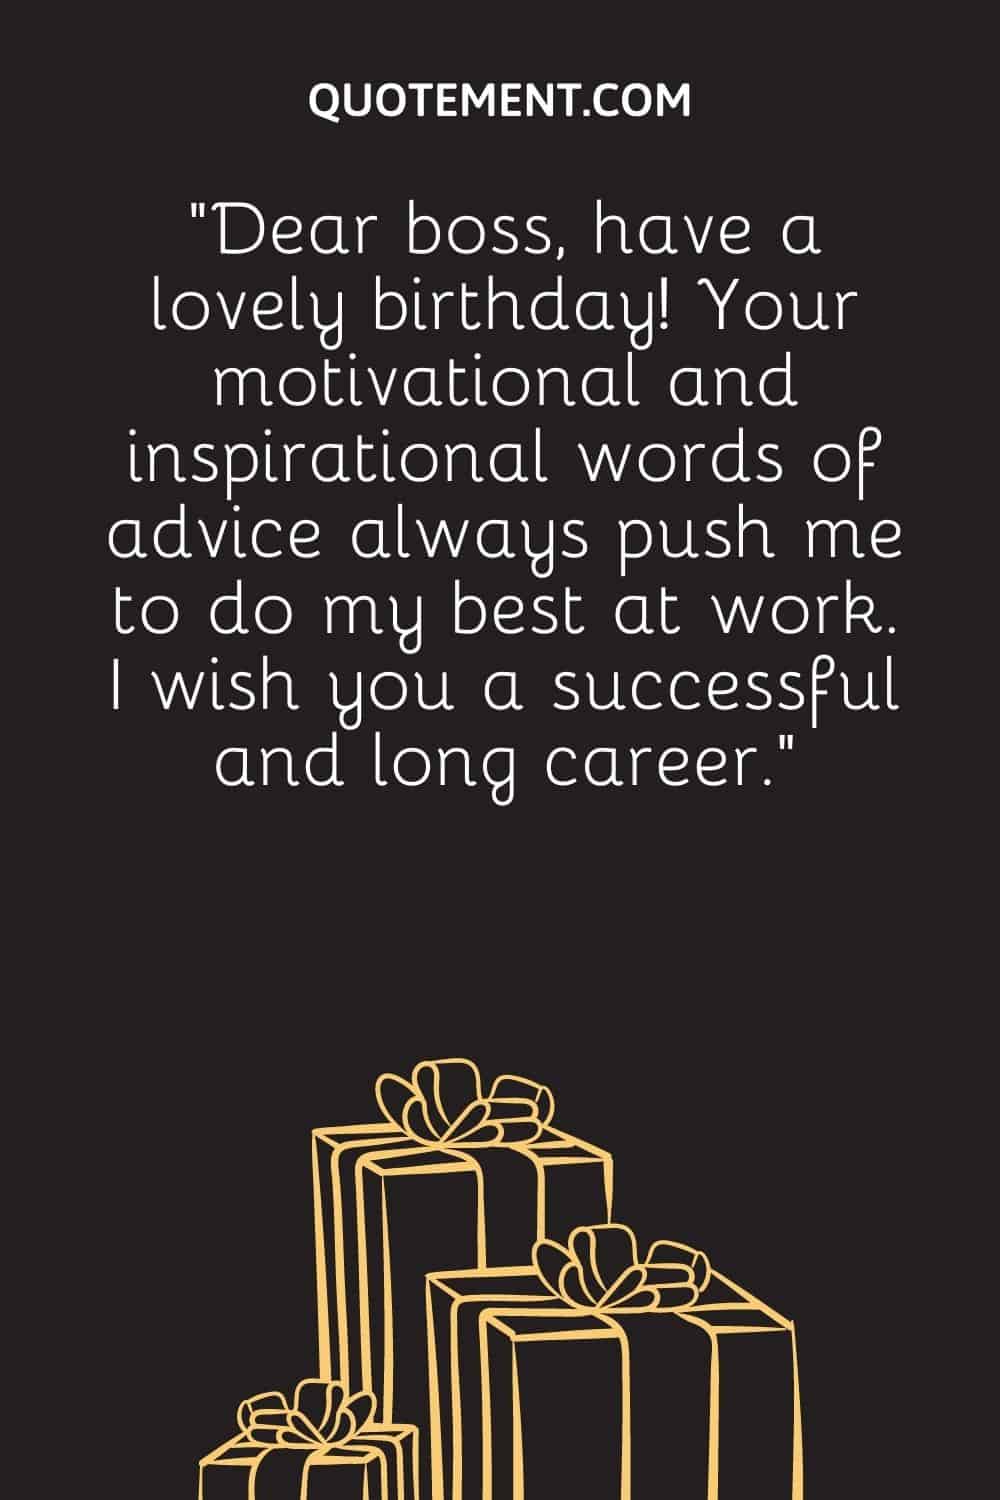 “Dear boss, have a lovely birthday! Your motivational and inspirational words of advice always push me to do my best at work. I wish you a successful and long career.”